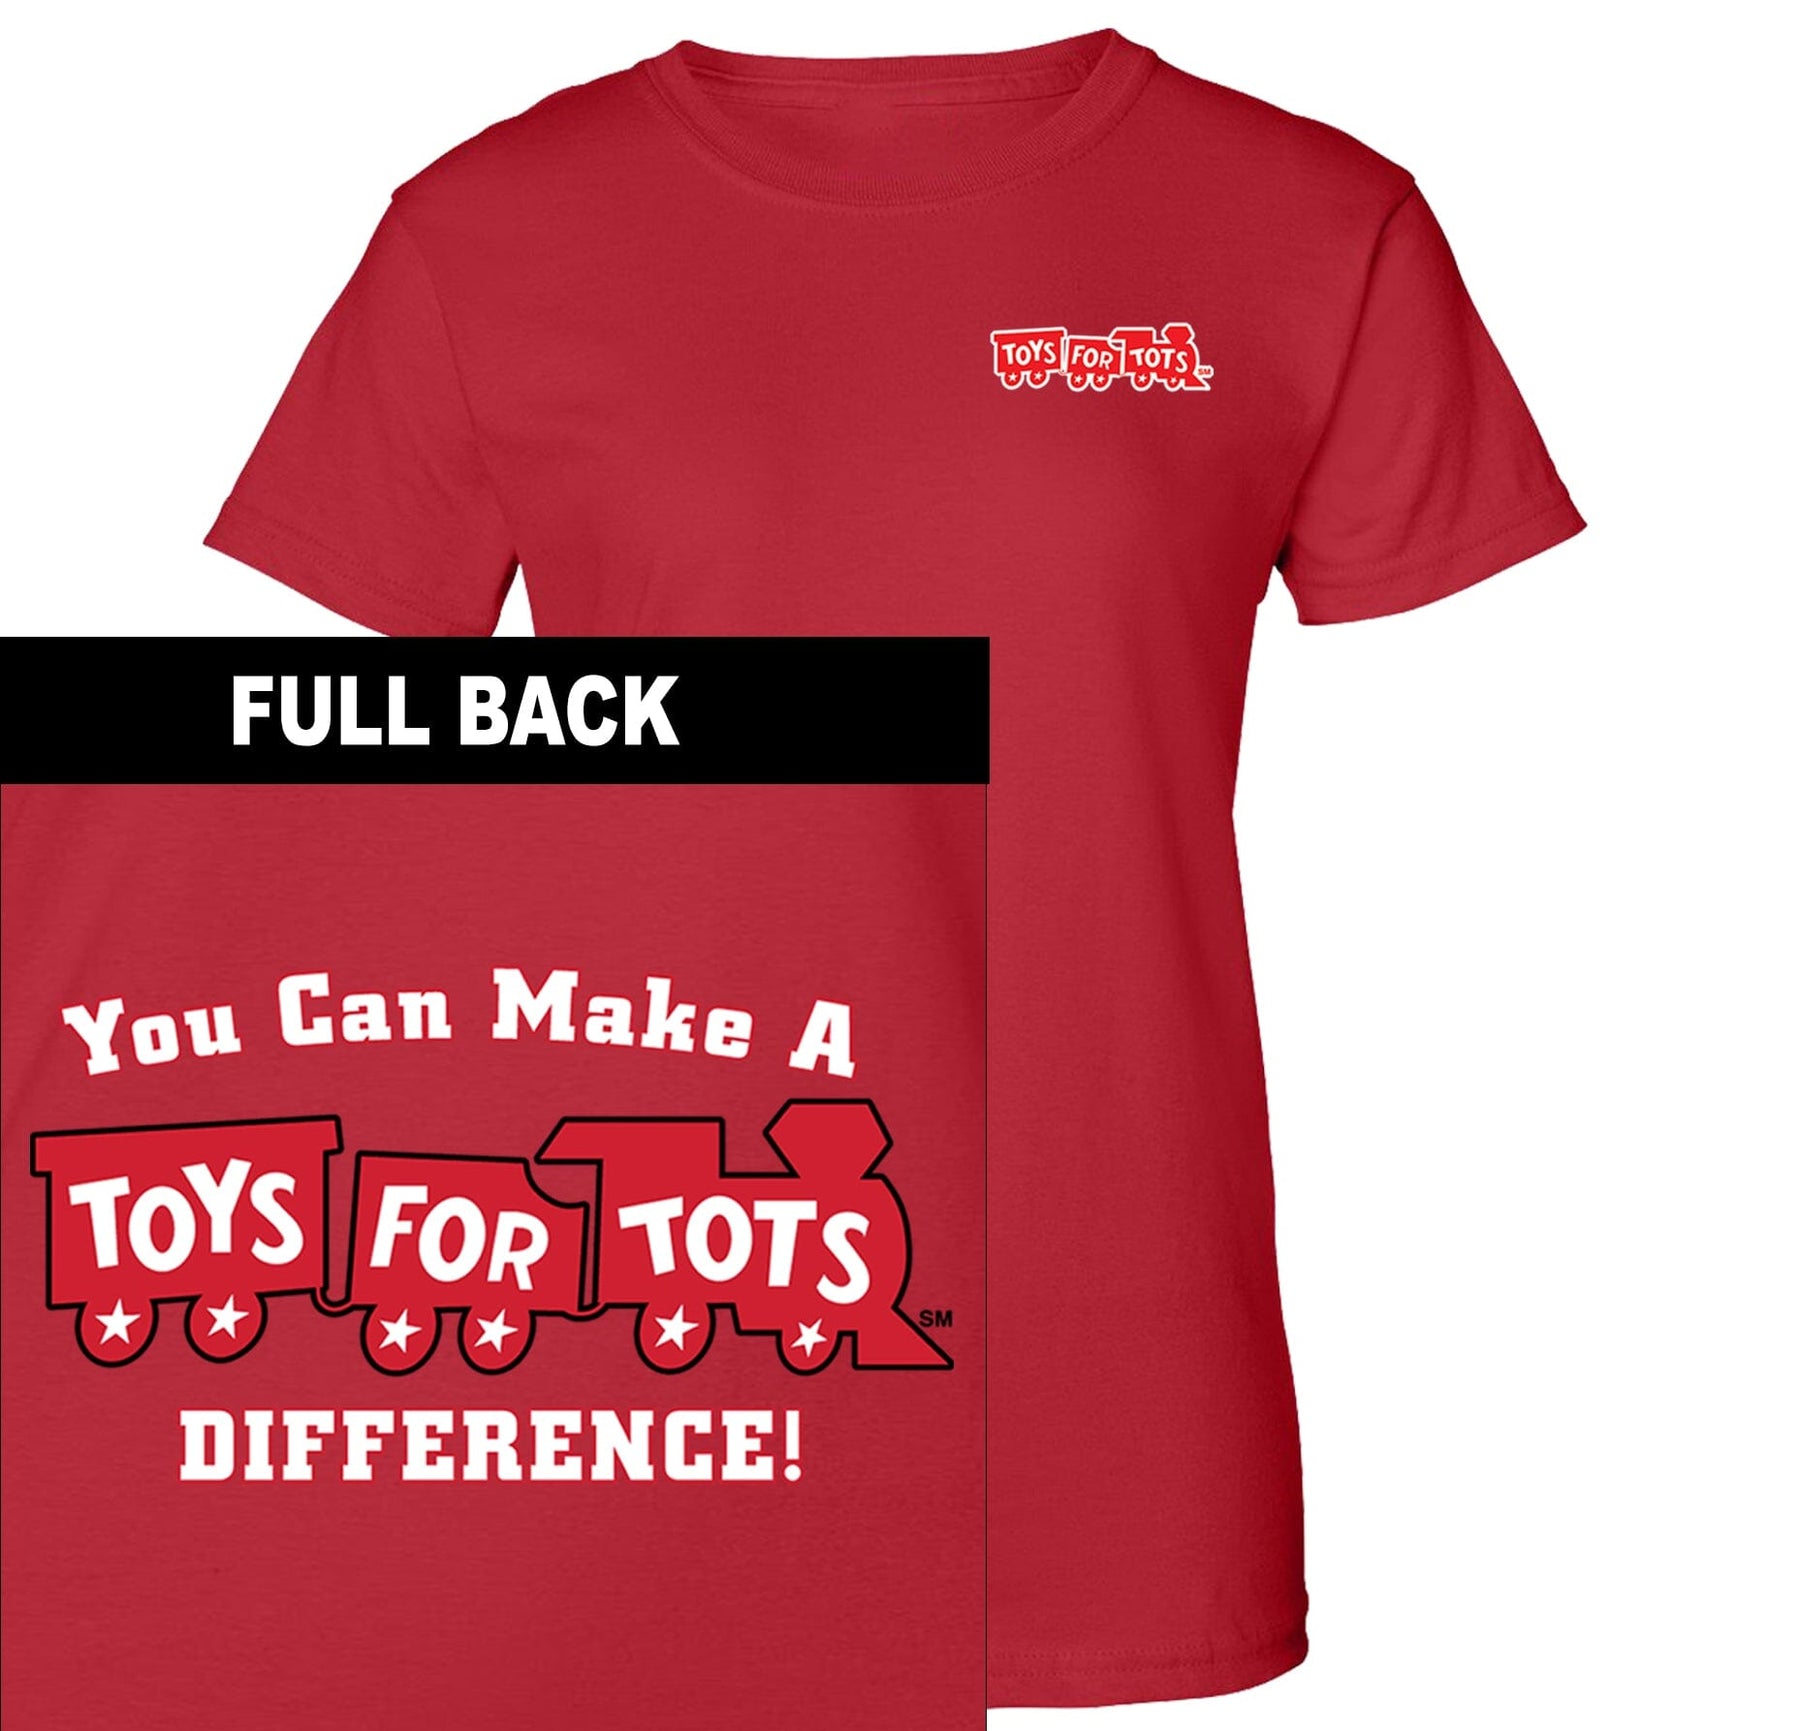 Make a Difference TFT Train 2-Sided Women's T-Shirt TFT Shirt marinecorpsdirecttft S RED 